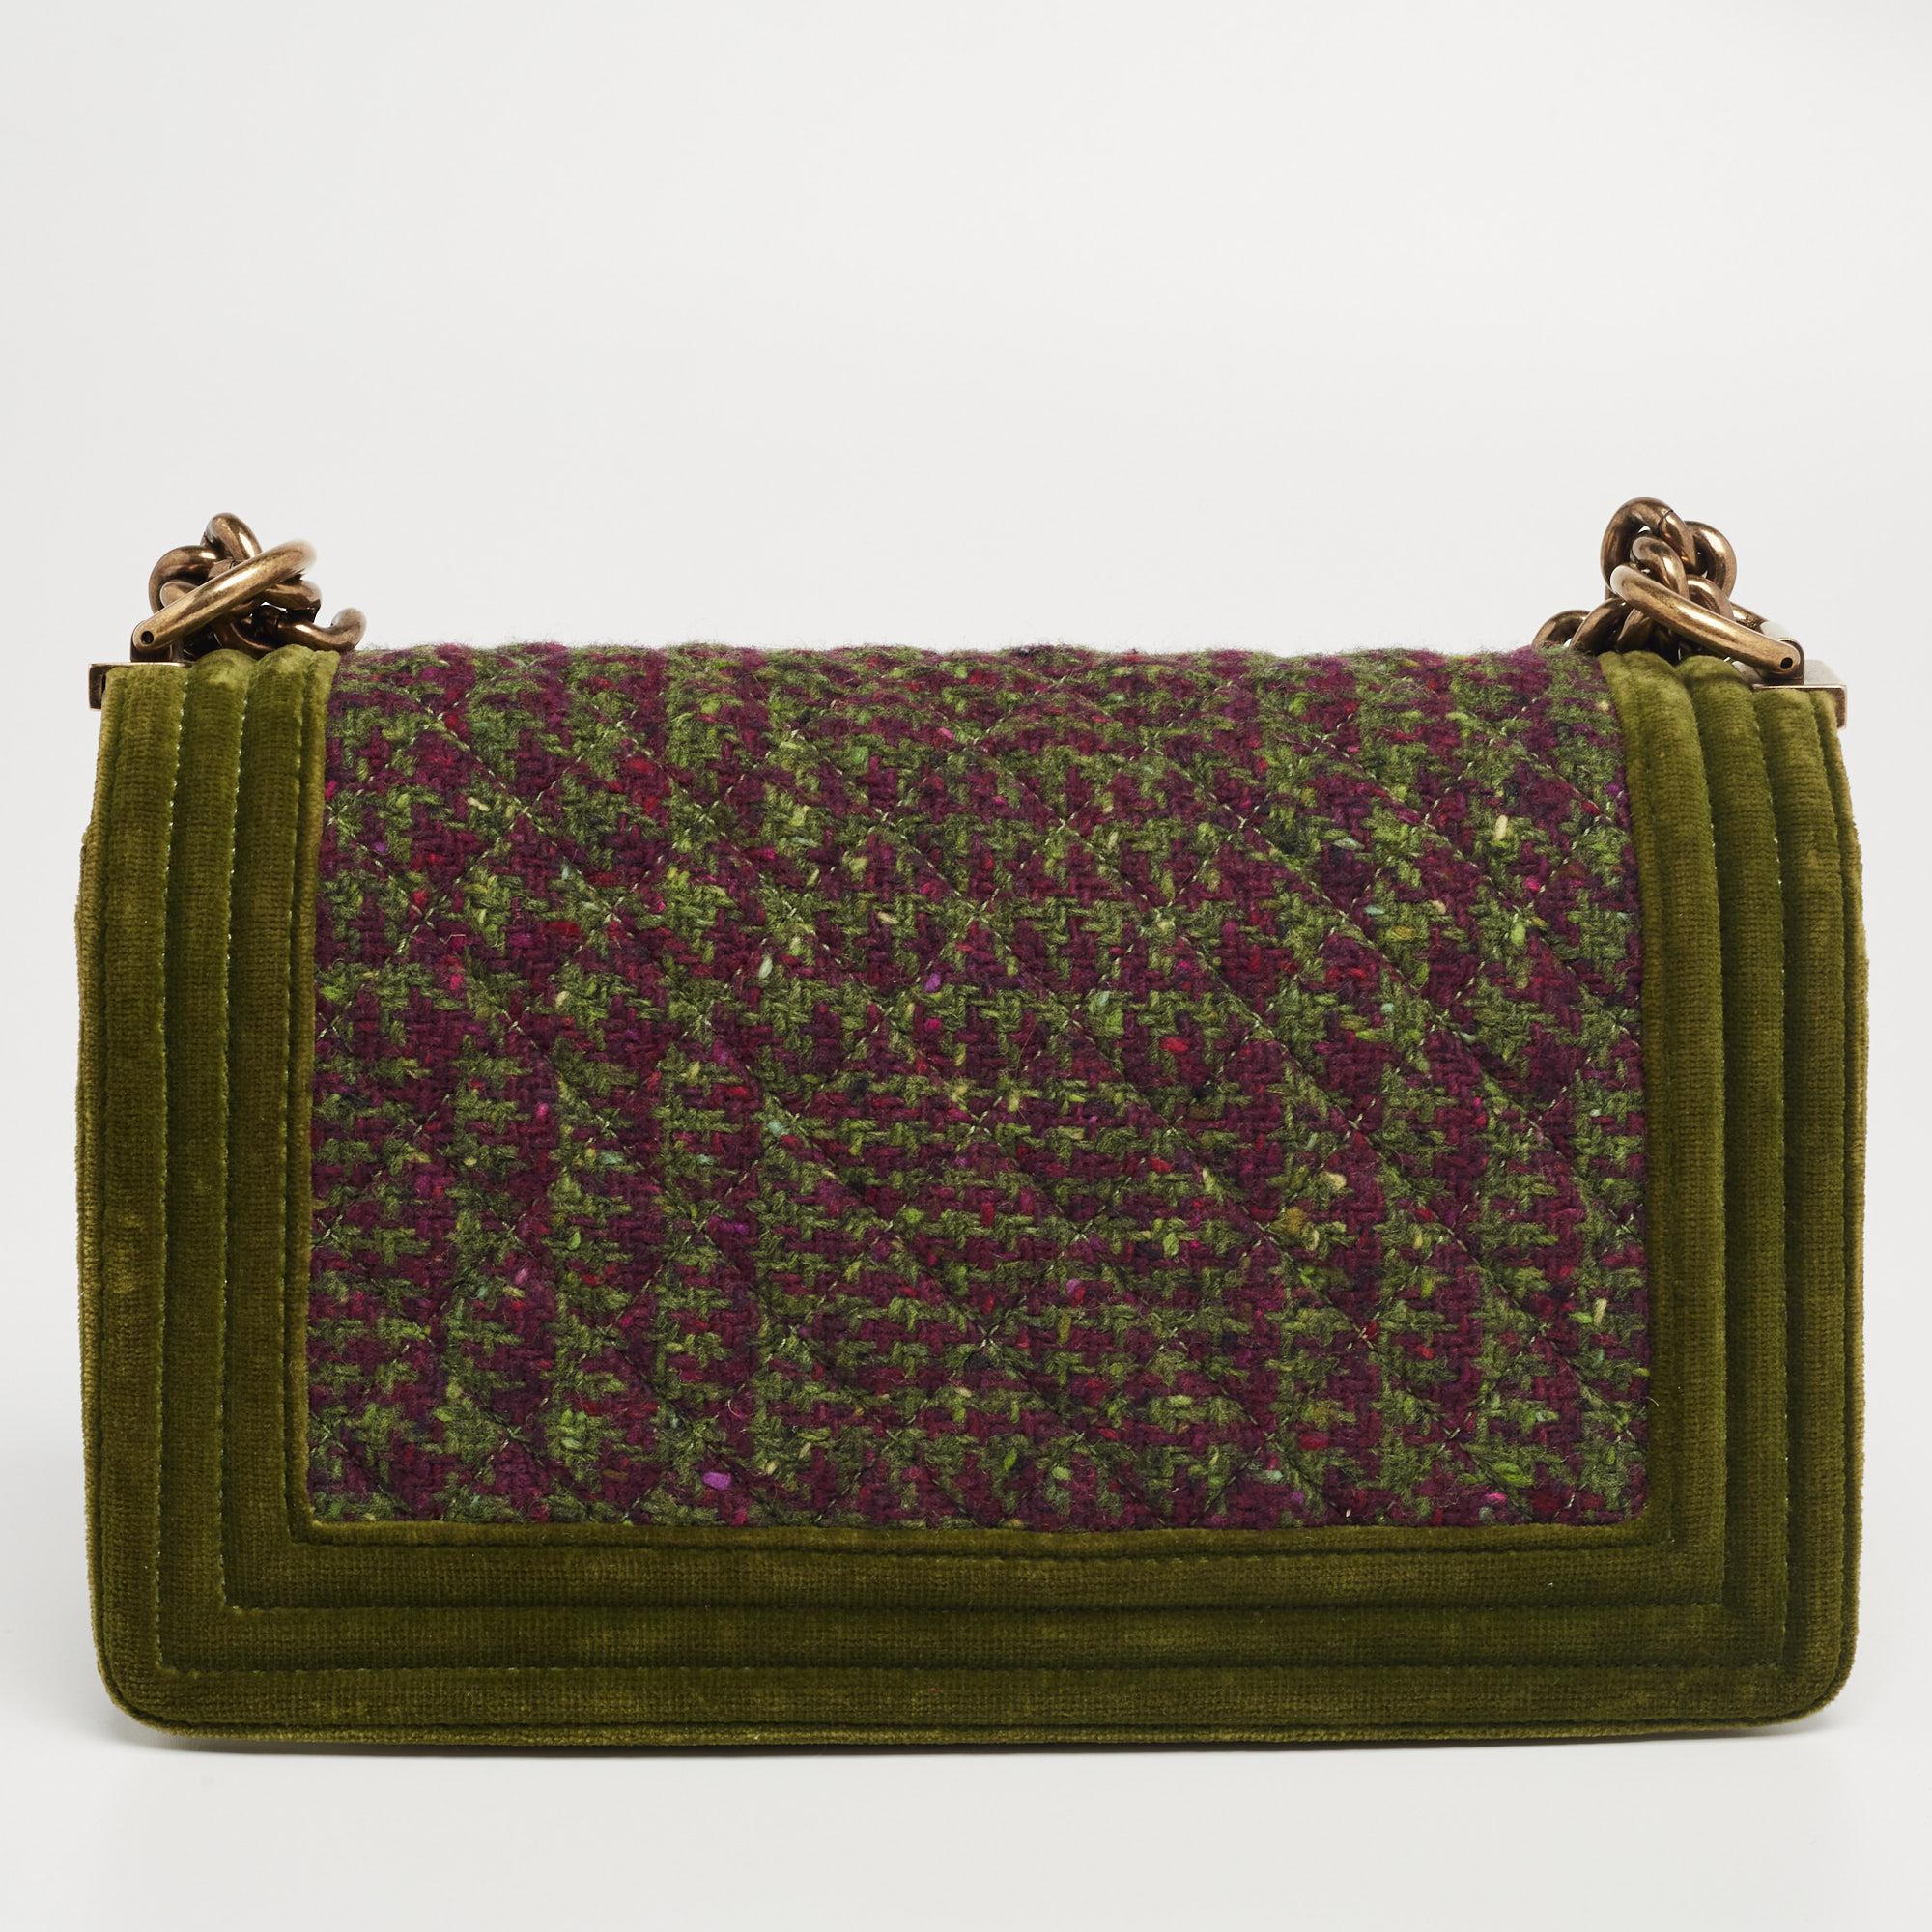 Every Chanel creation deserves to be etched with honor in the history of fashion as they carry irreplaceable style. Like this stunner of a Boy Flap that has been exquisitely crafted from tweed and velvet. It does not only bring multiple shades but